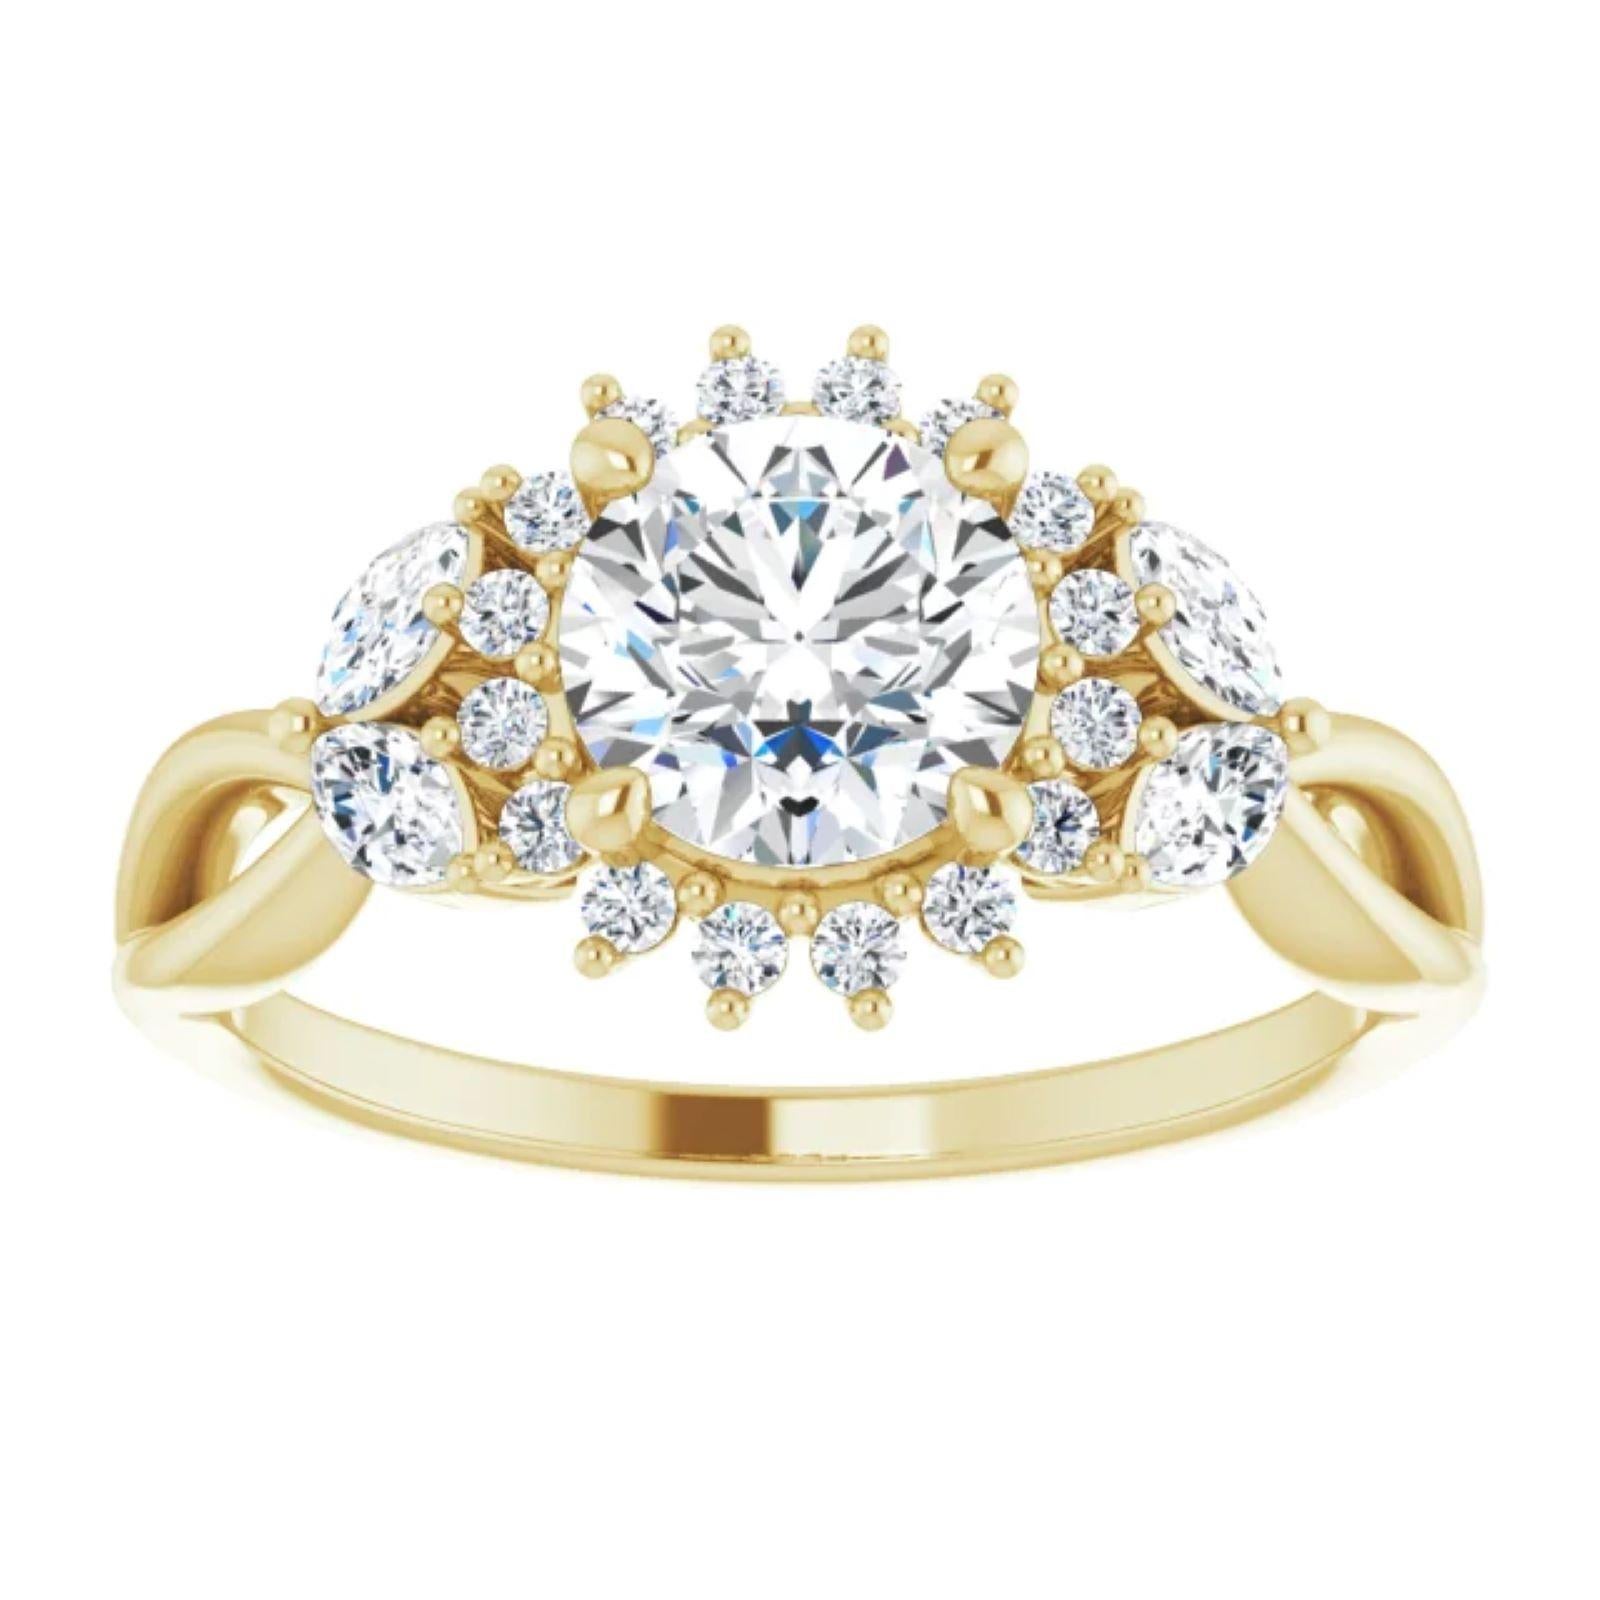 Specifications
Weight:	2.1137 DWT (3.29 grams)
Primary Stone Count:	1-stone
Primary Stone Type:	N/A
Diamond Color:	GHI
Approx. Shoulder Width:	5.13 mm
Approx. Finger Size:	7
Approx. Top Height:	5.85 mm
Material:	Gold
Selling Unit of Measure:	EA
Ring